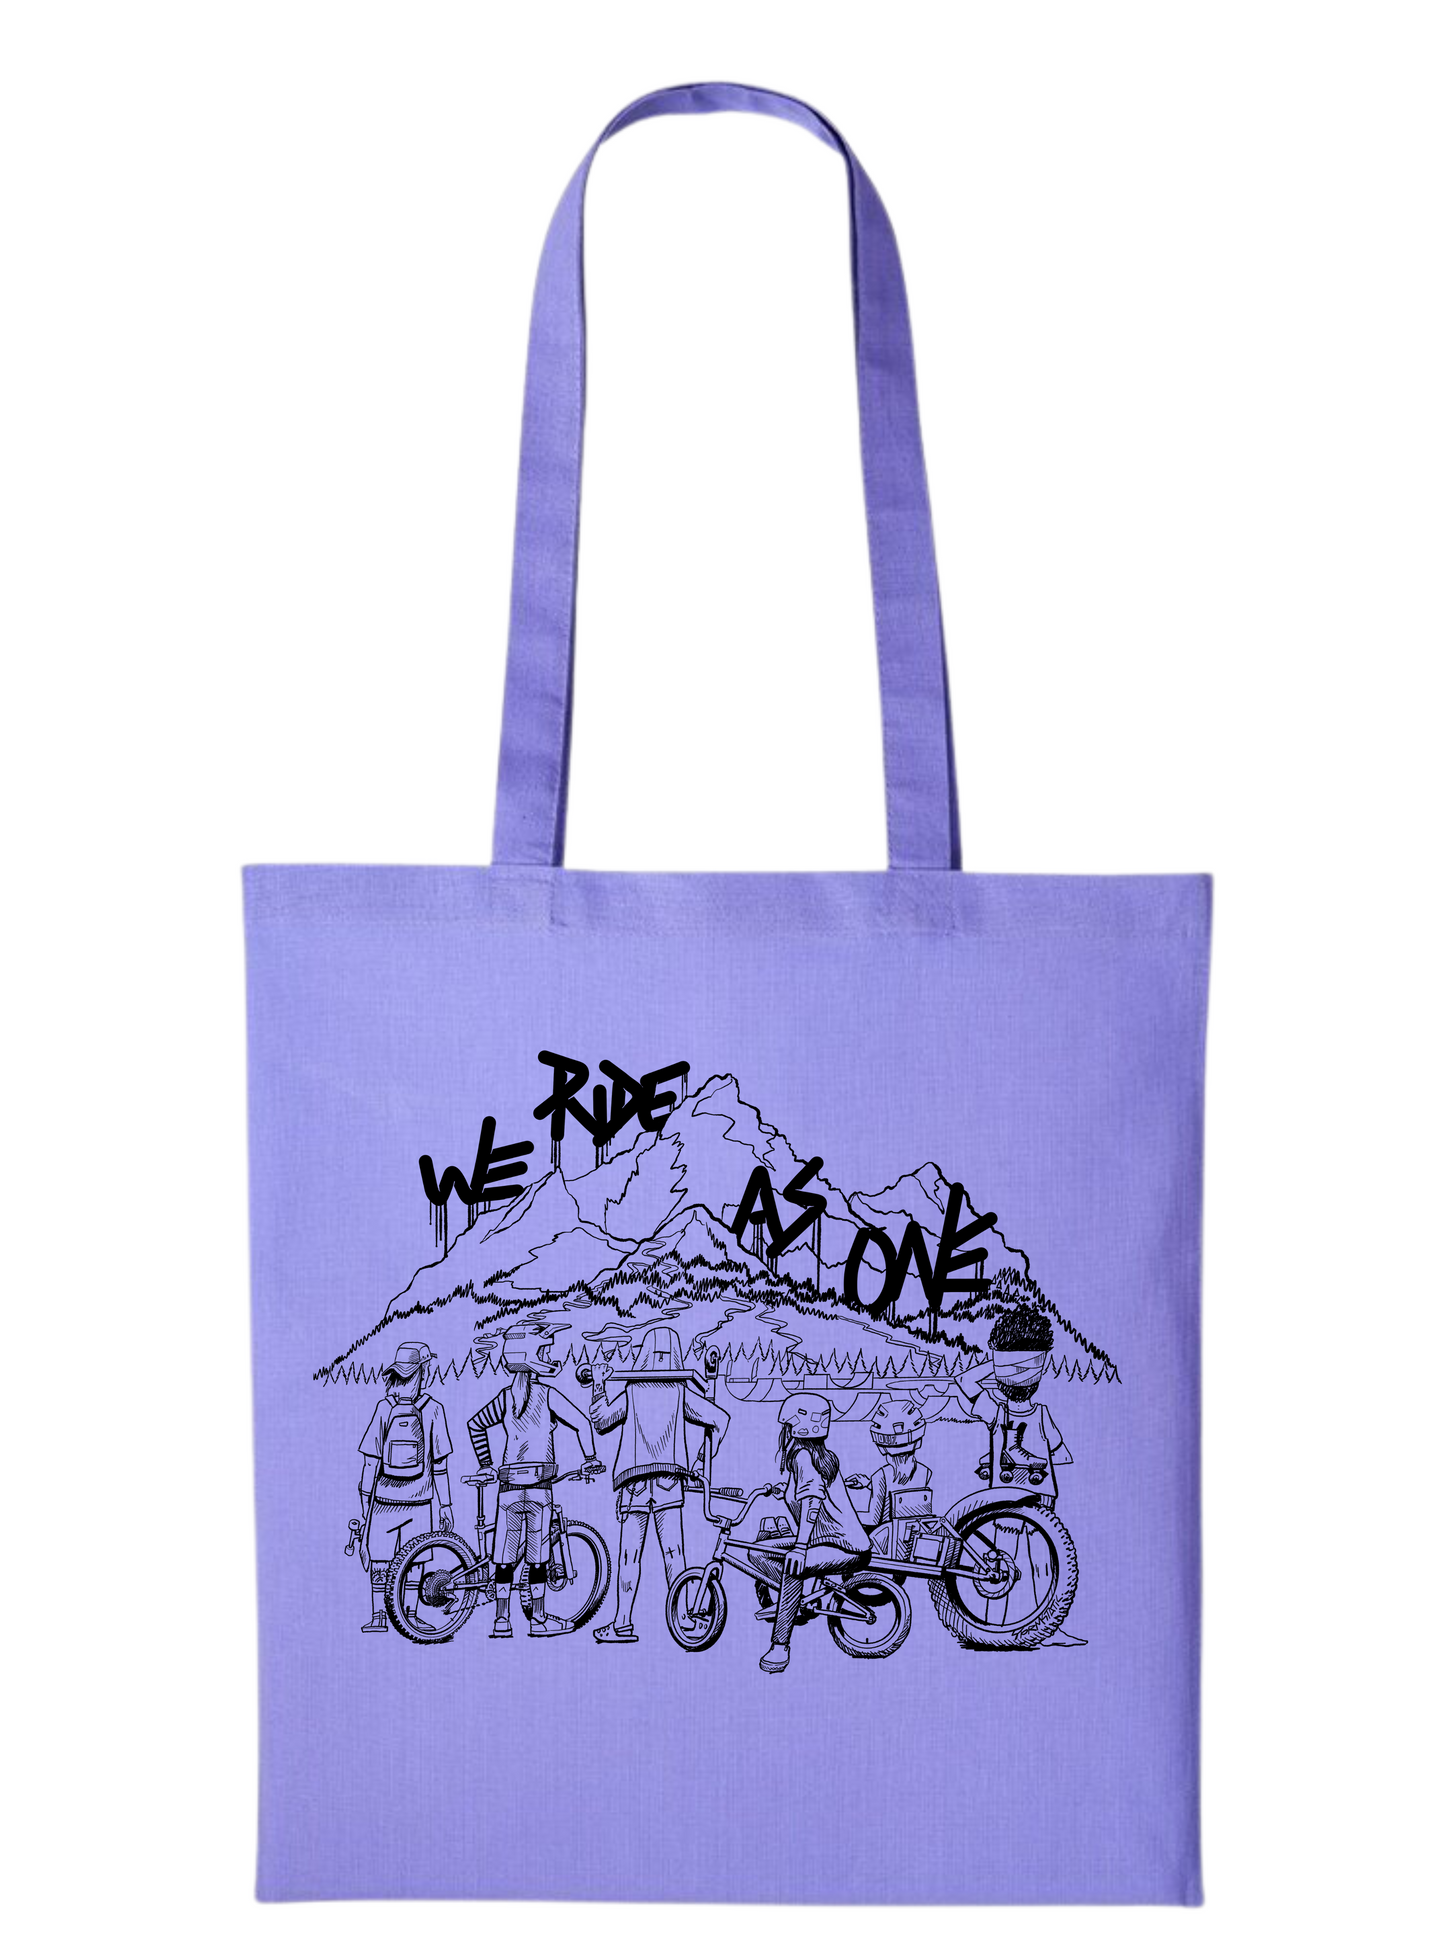 We Ride as One Tote Bag